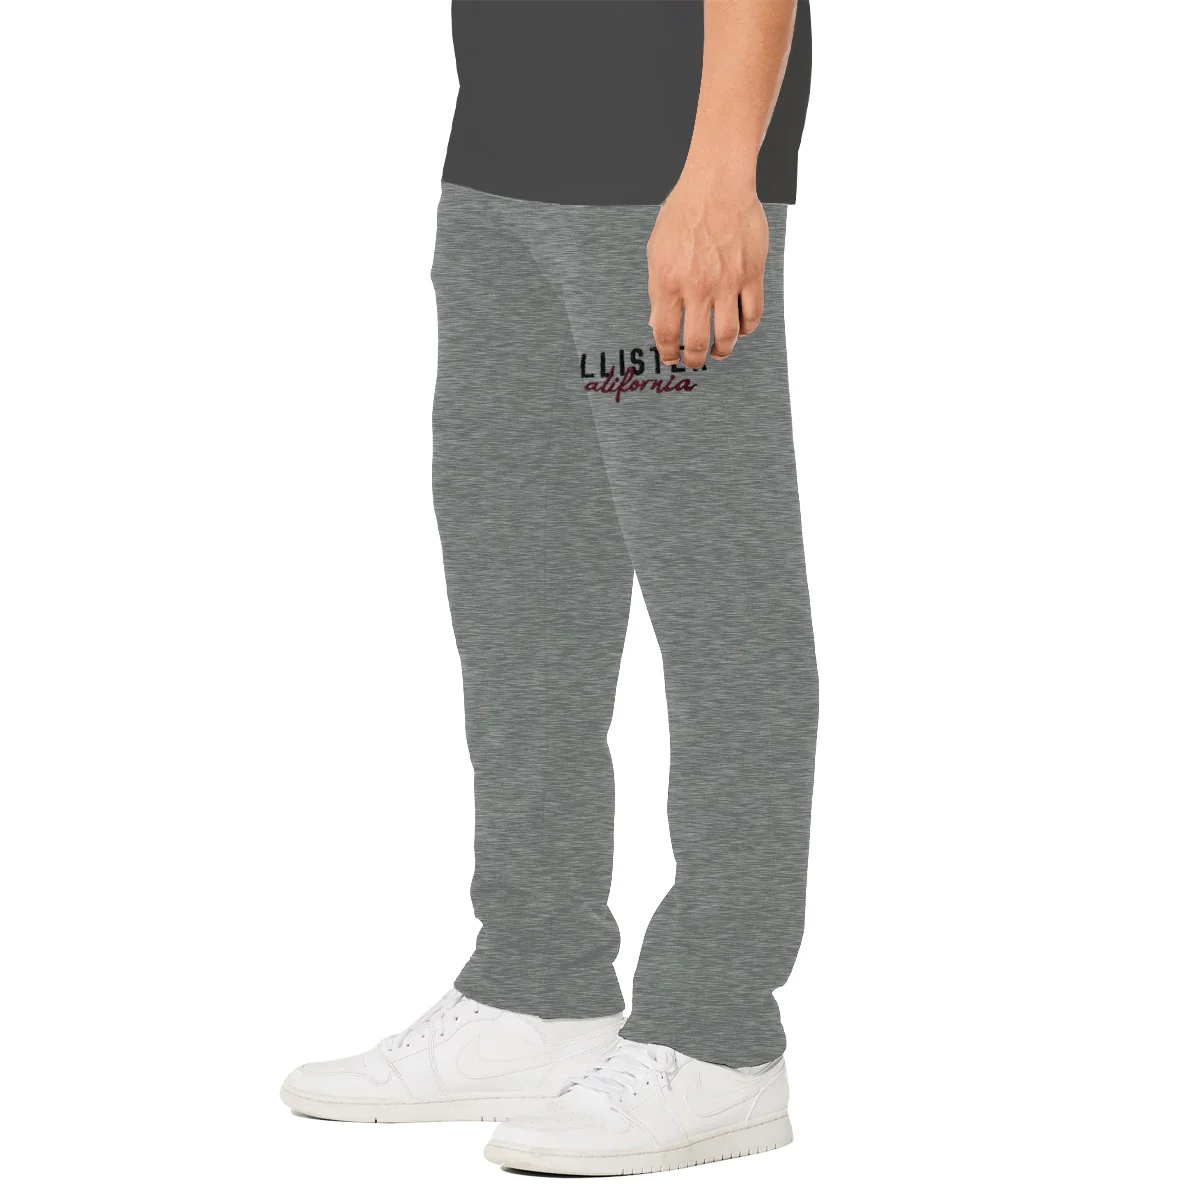 HLSTR SIGNATURE EMBROIDERED SWEAT PANT ONLINE SHOPPING IN PAKISTAN